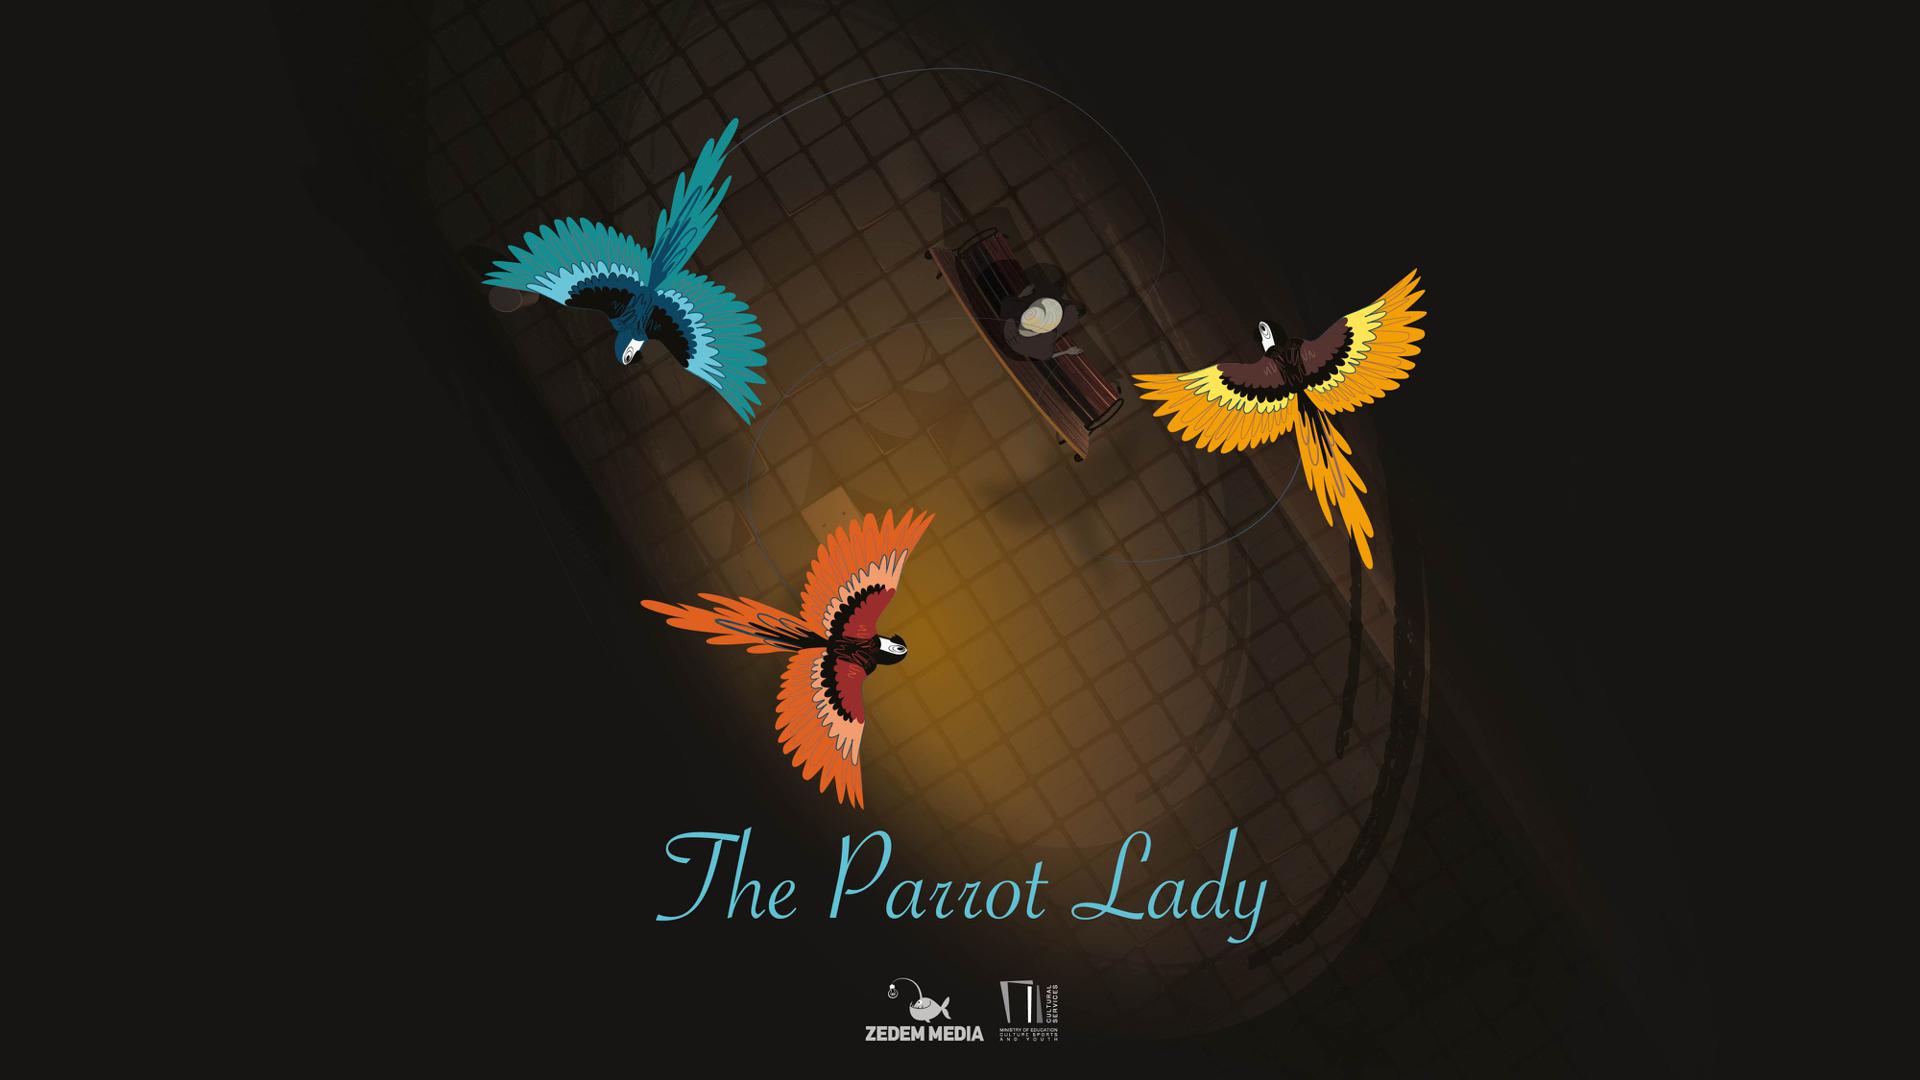 The Parrot Lady